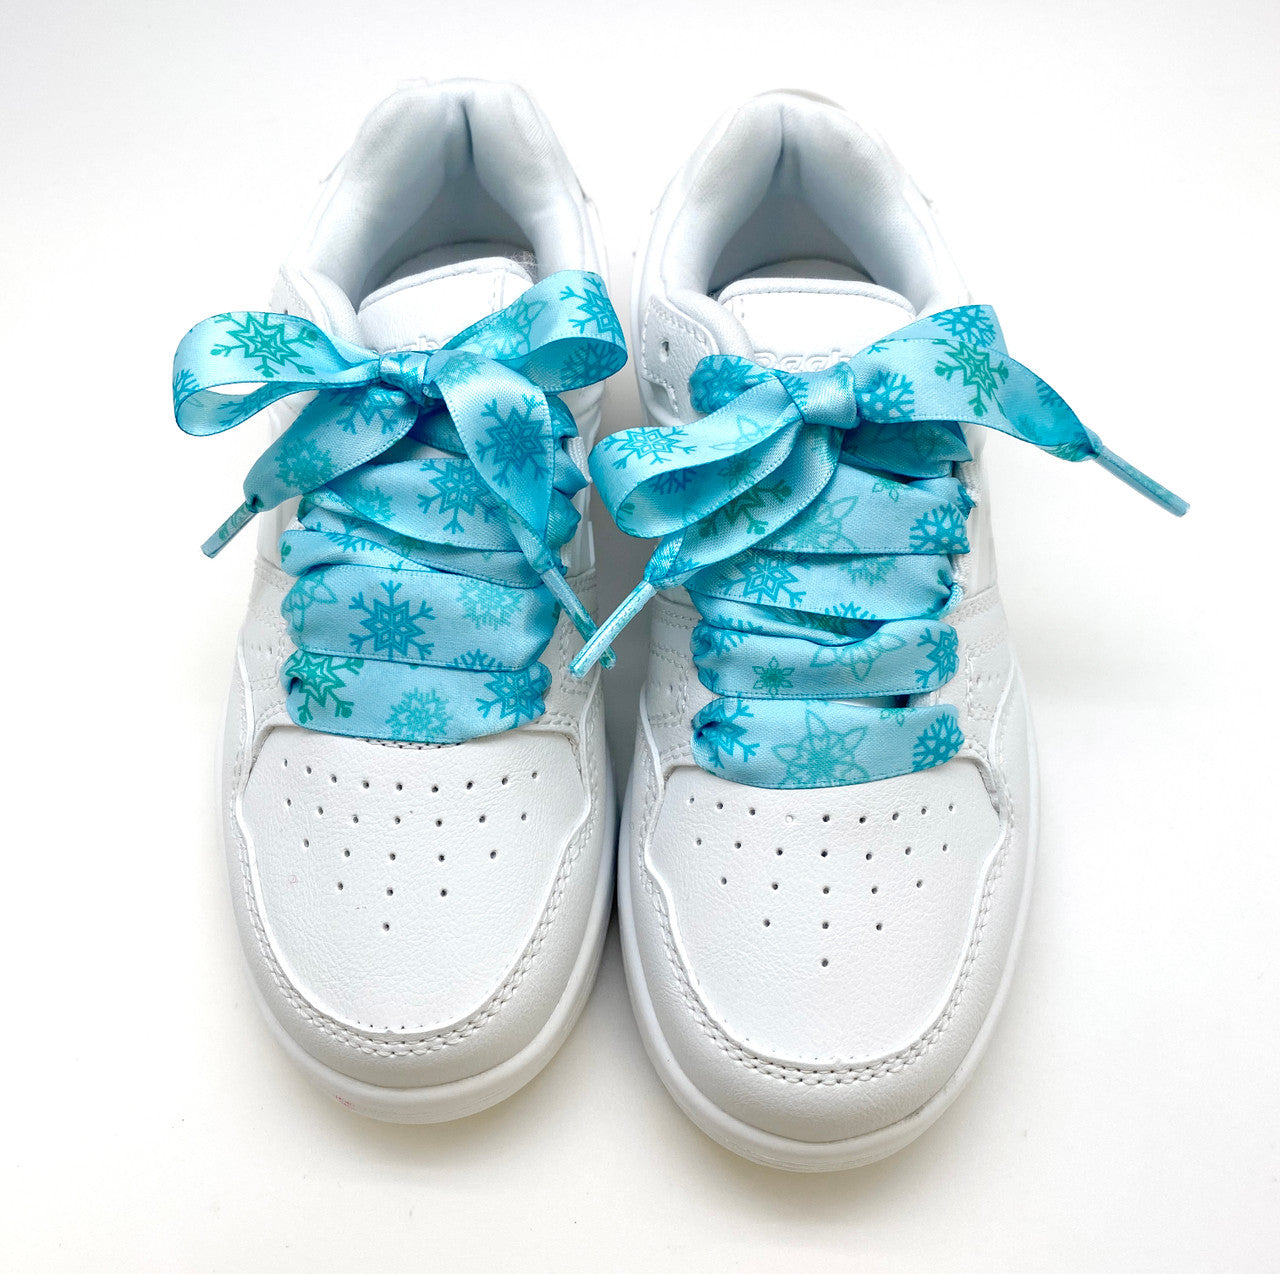 Satin shoelaces tie Frozen snow flake design is perfect for adding some fun and fashion to your sneakers! This is a great shoelace for fun dance shoes, wedding shoes, cheerleading and recitals! All our ribbon shoelaces are printed using dye sublimation technology and can be washed, ironed and re-used! All our laces are designed and printed in the USA